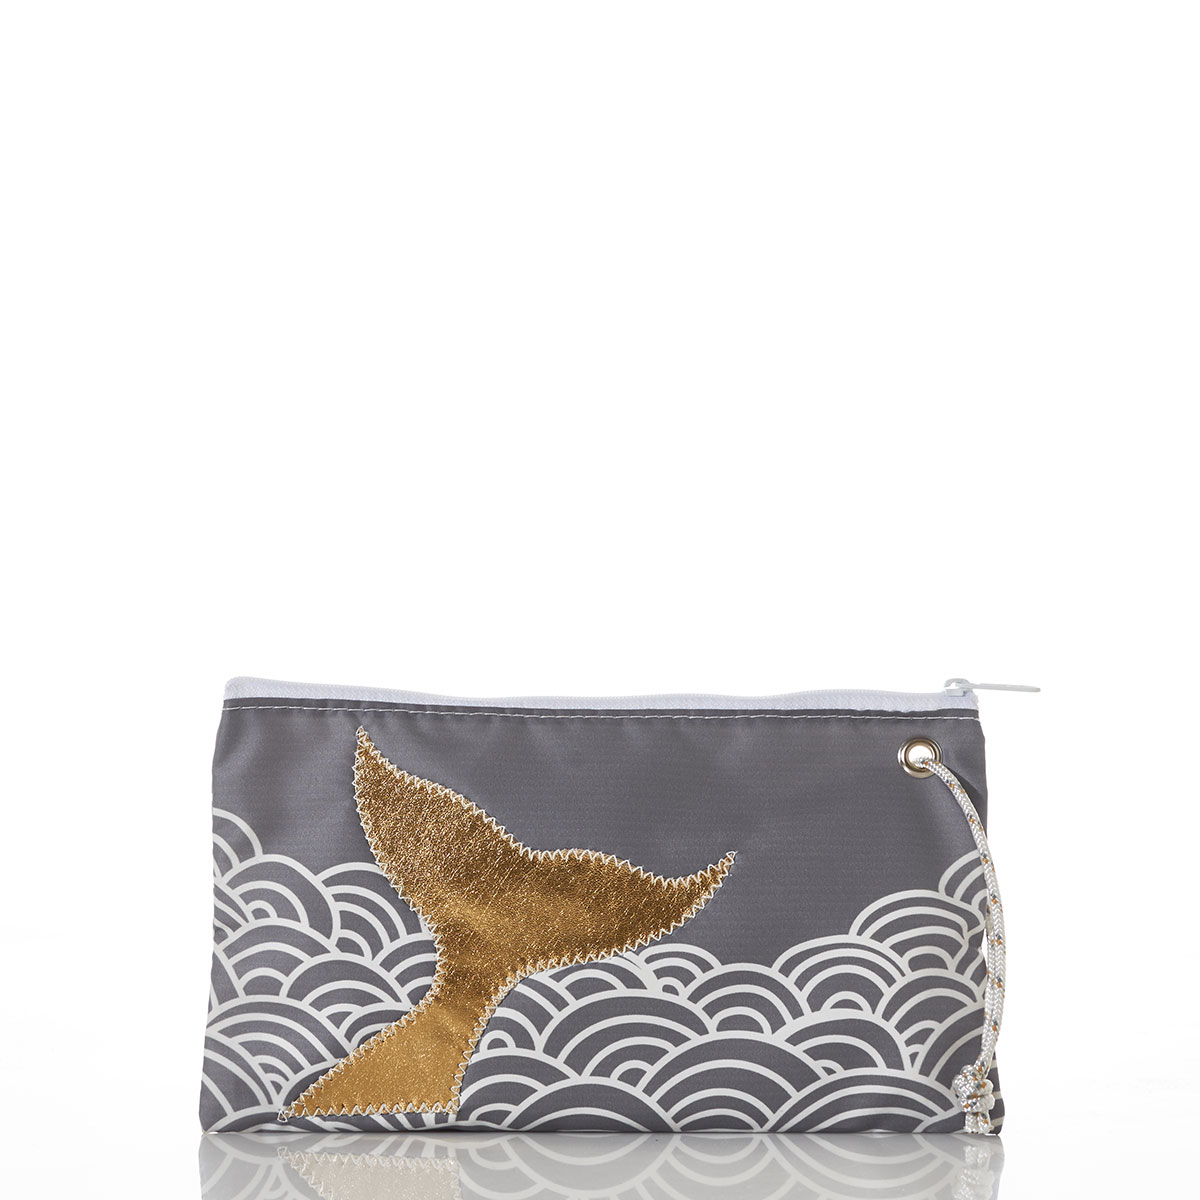 Gold Mermaid Tail and Waves Large Wristlet